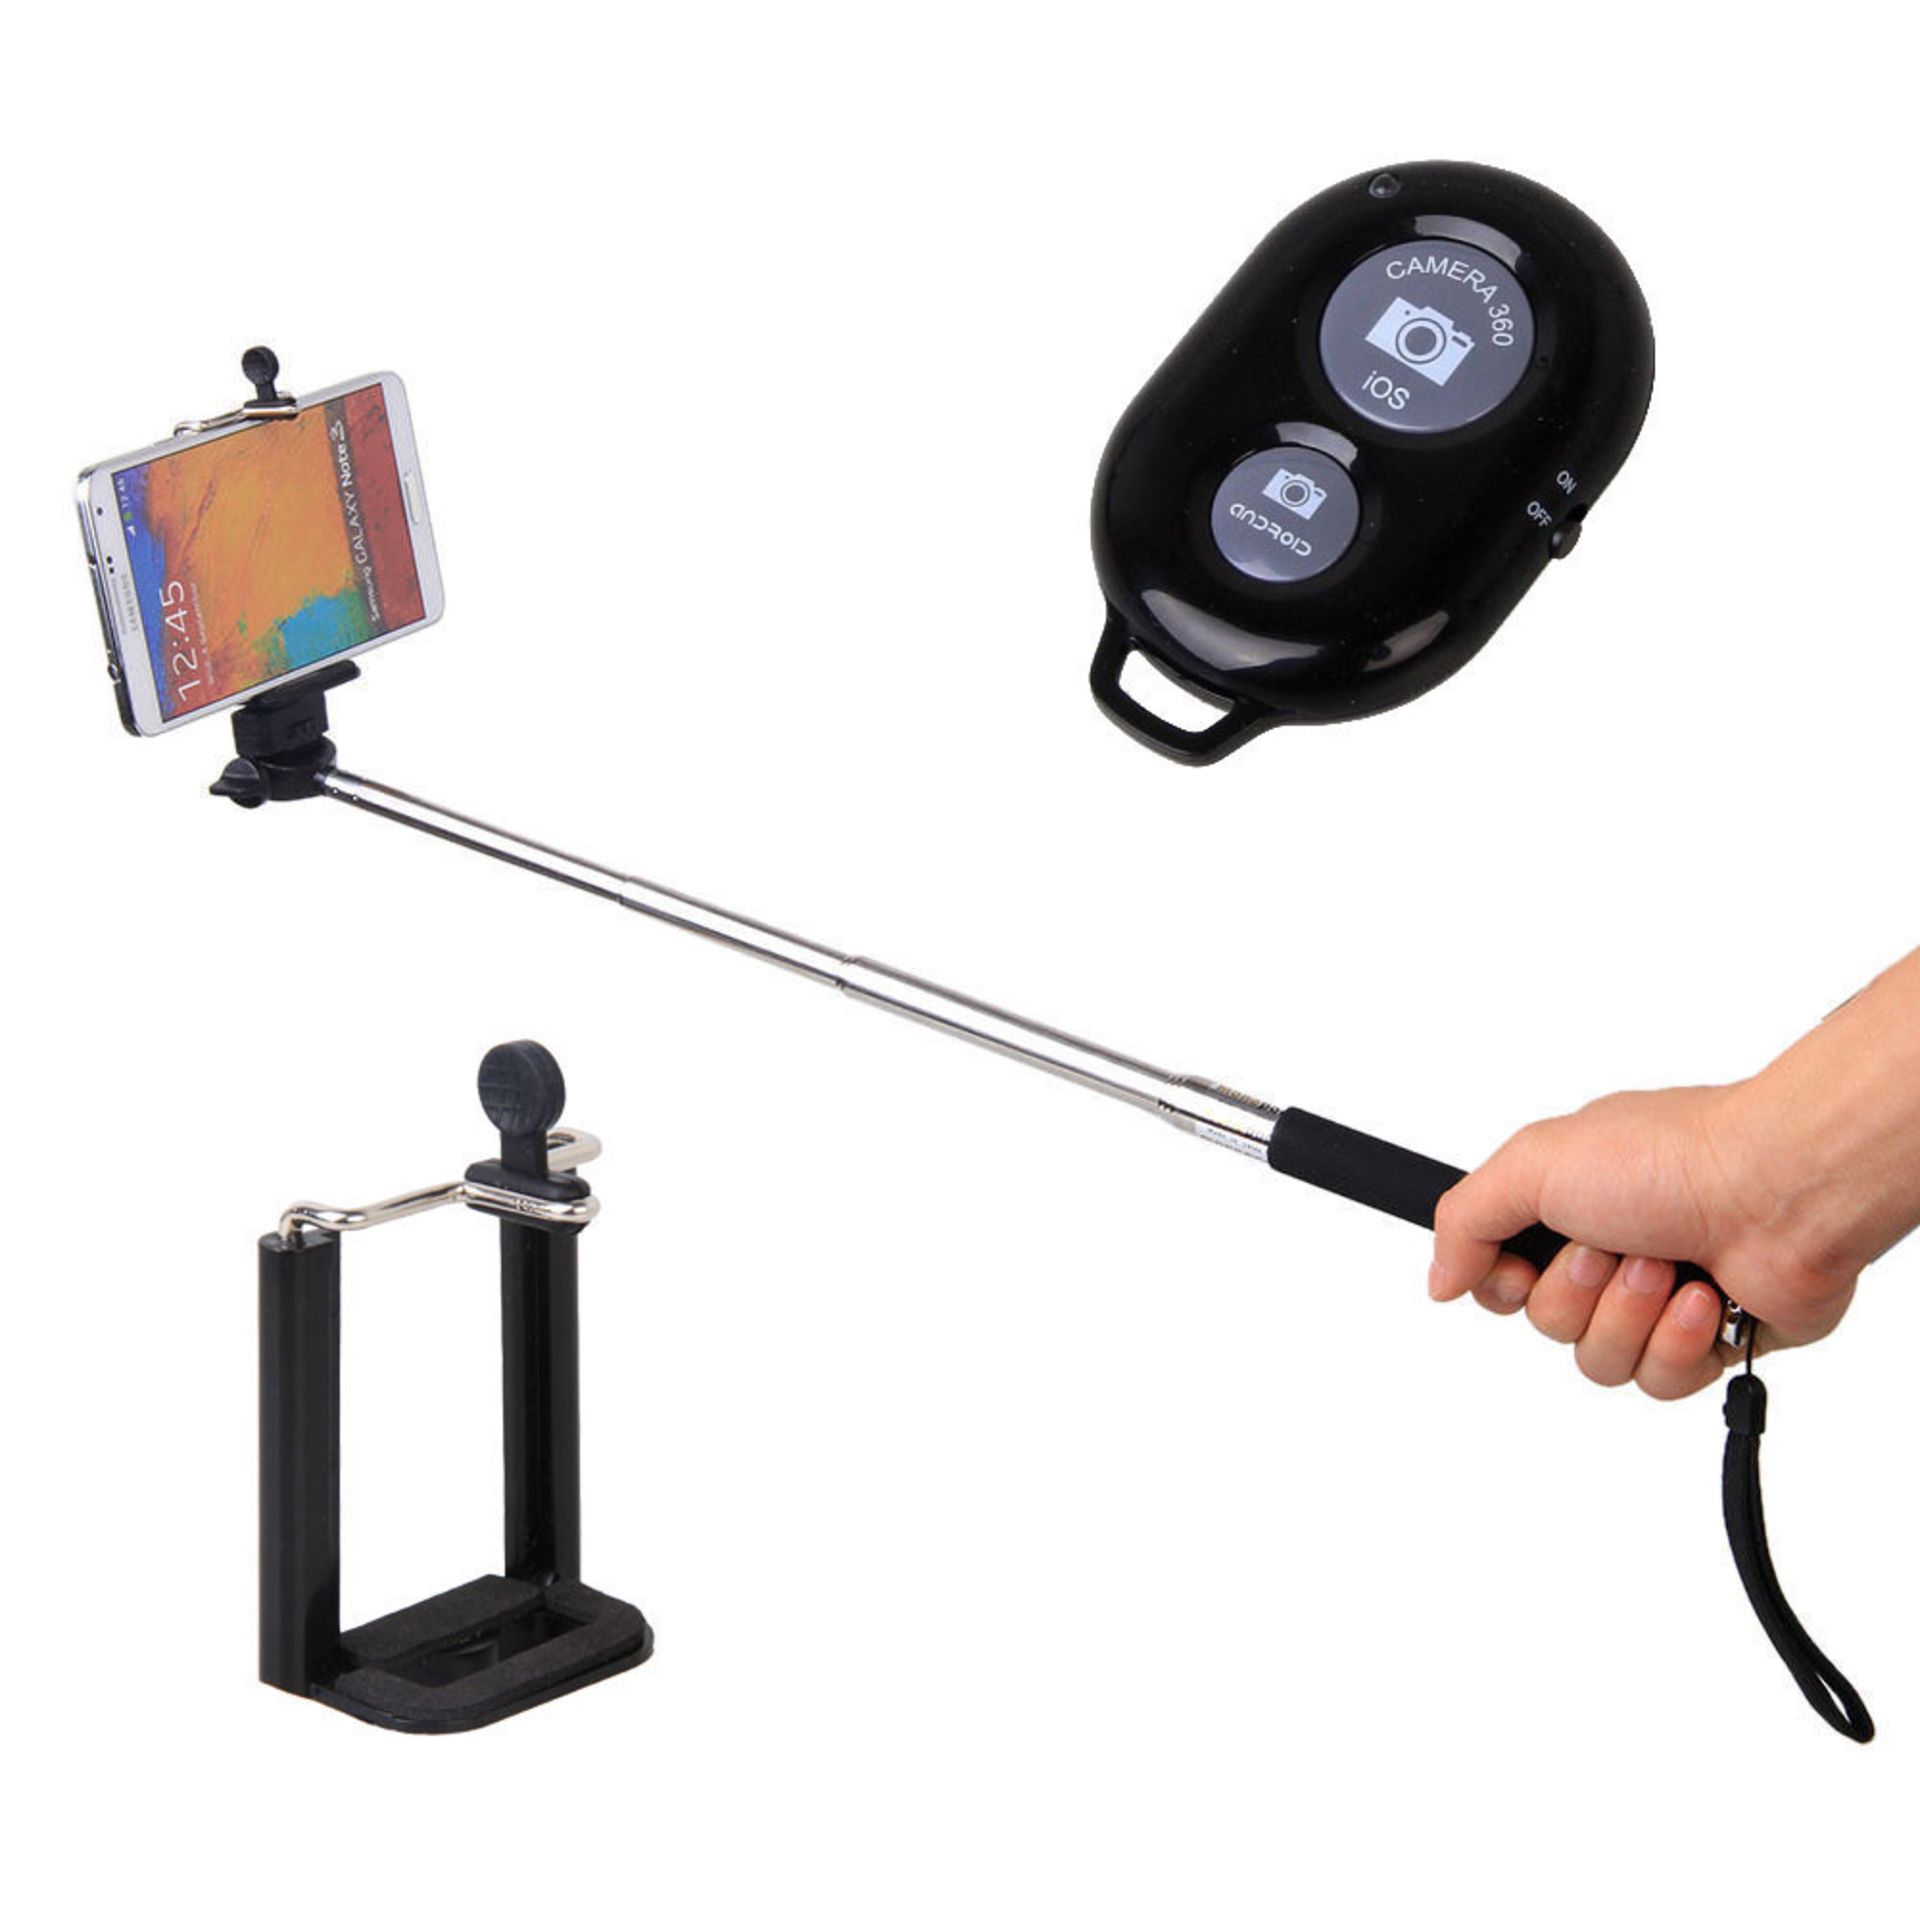 V *TRADE QTY* Brand New Selfie Stick with Bluetooth Remote Control - RRP £19.09 X 6 YOUR BID PRICE